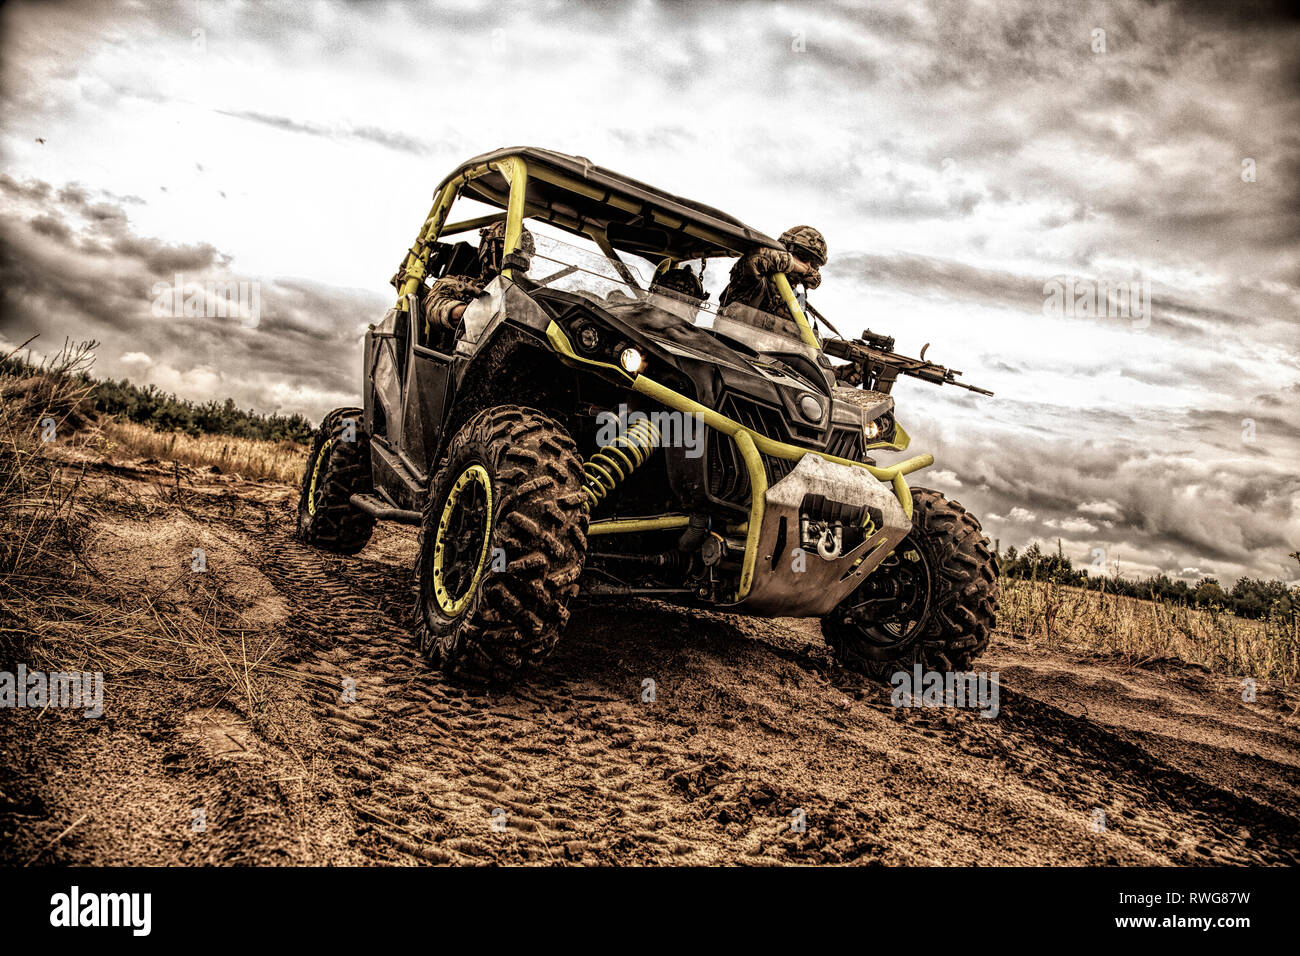 Mobile infantry team on patrol in an off-road military buggy. Stock Photo